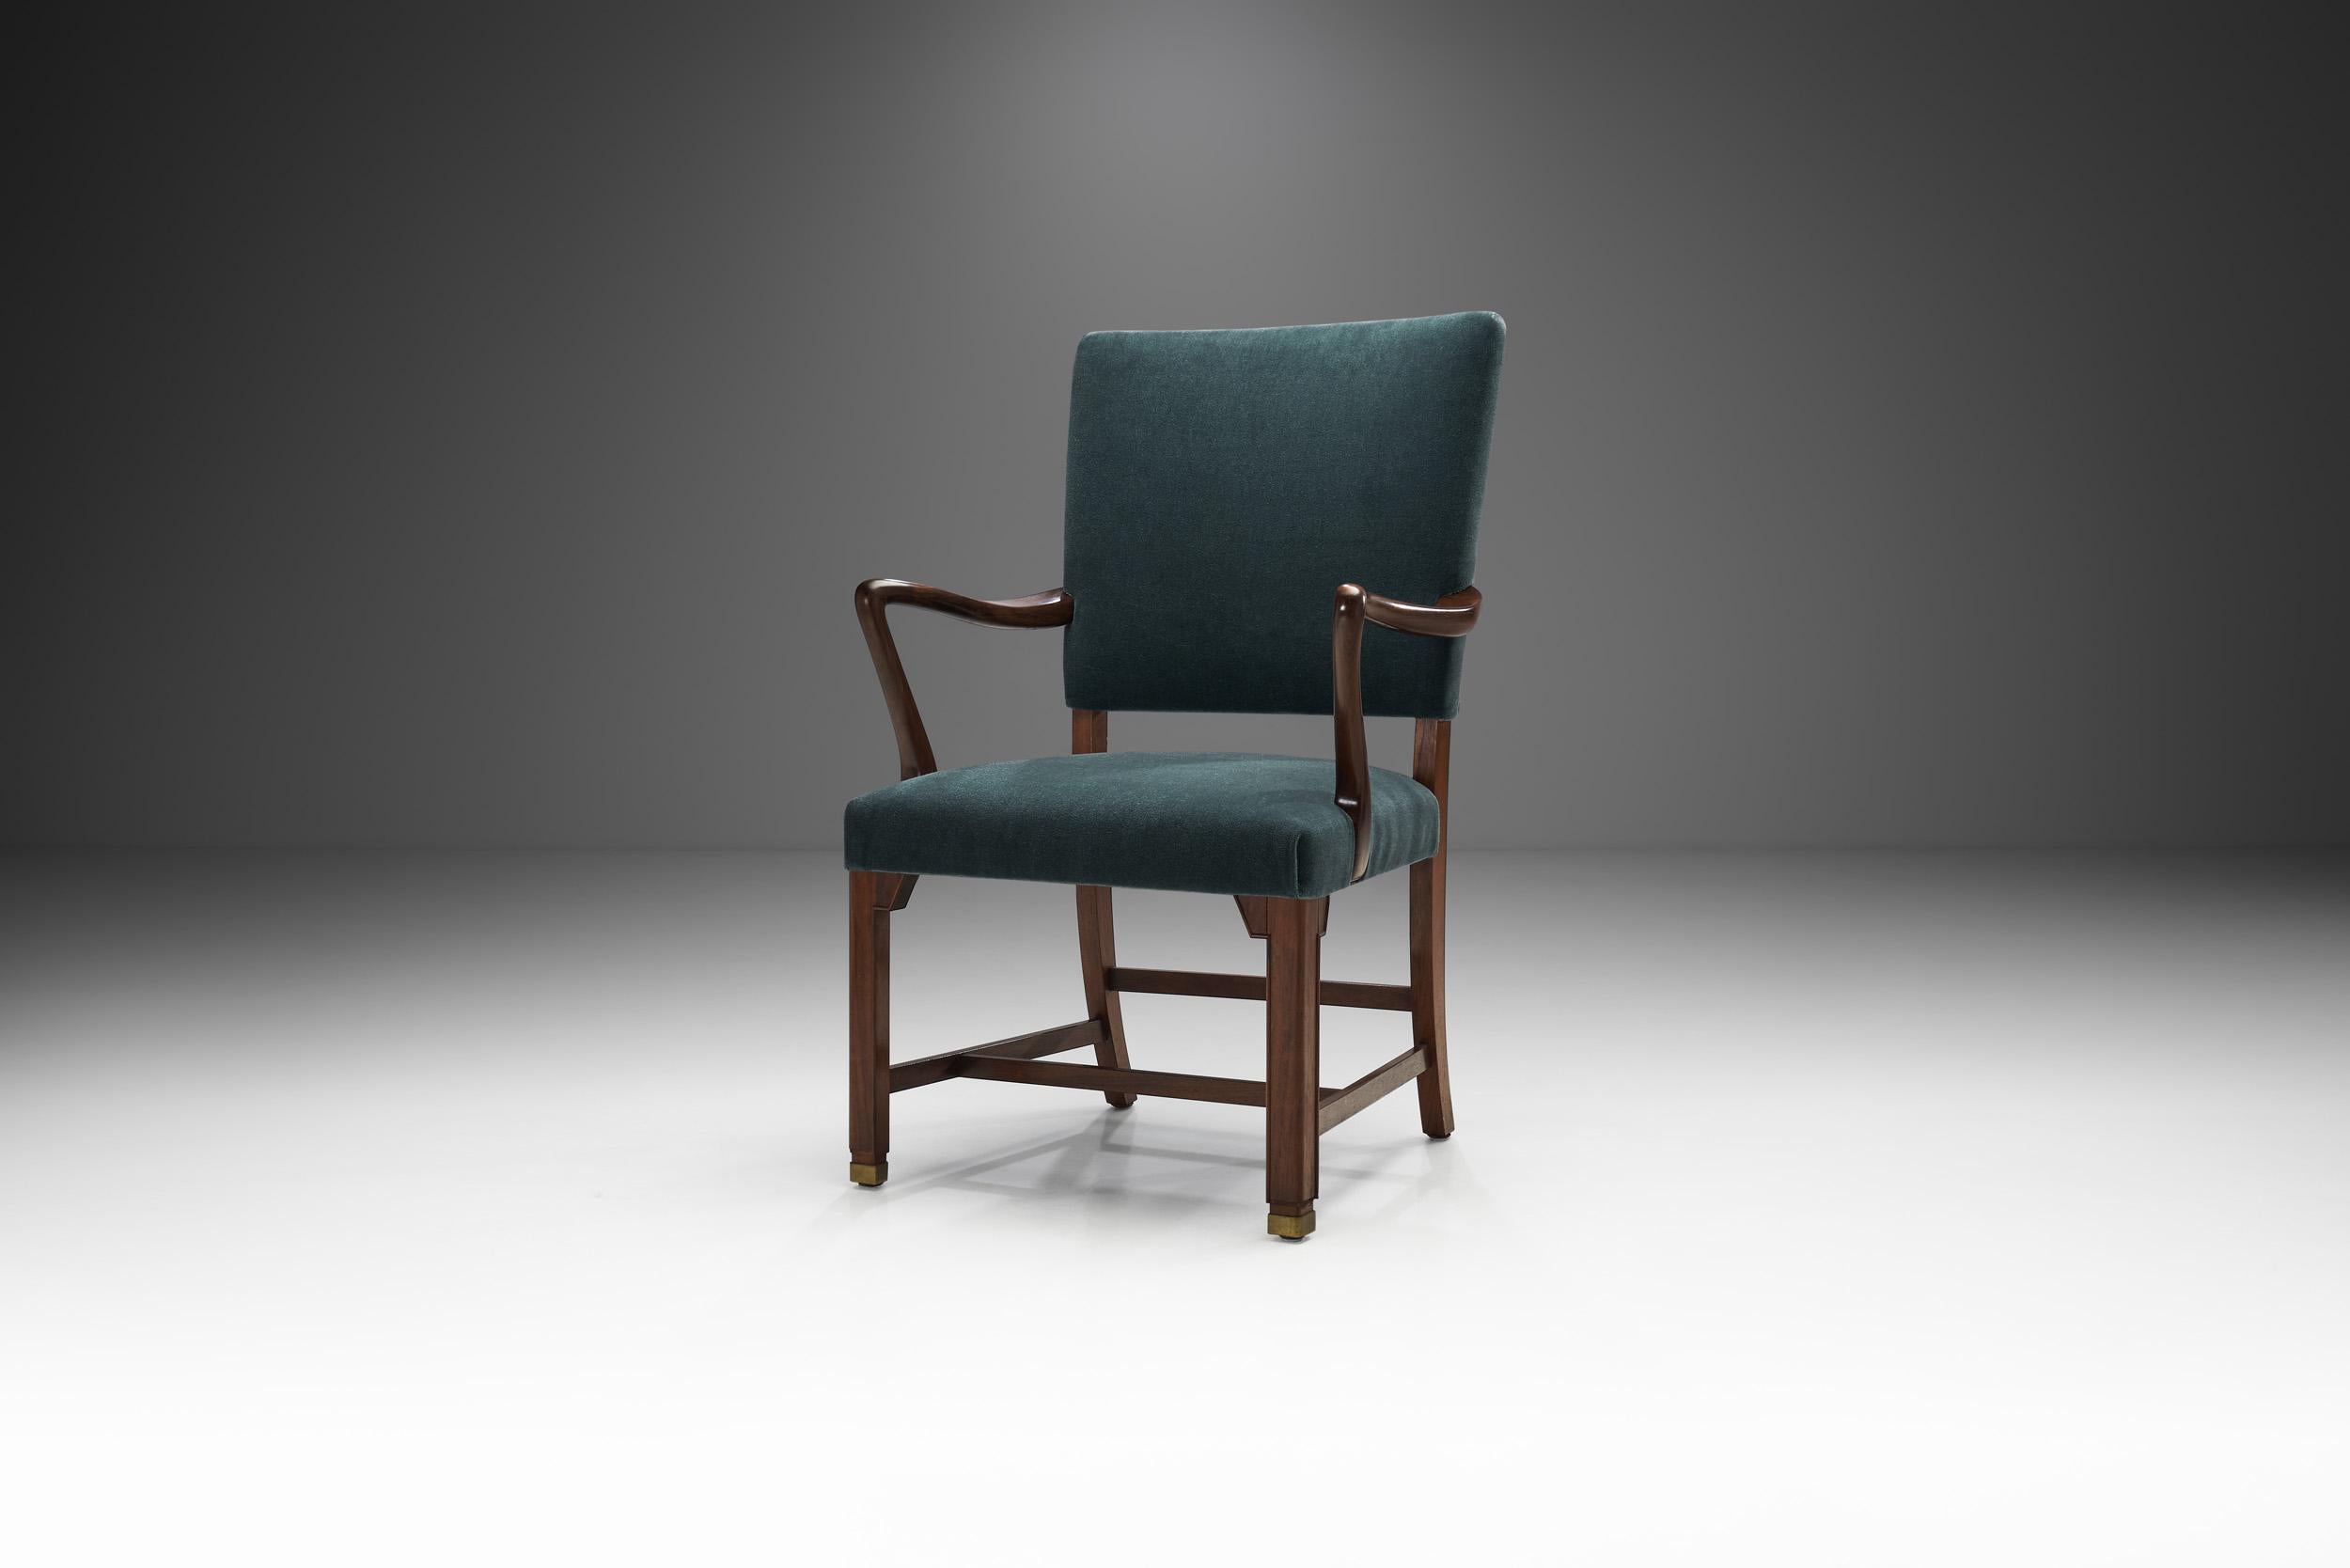 This unique easy chair is a great representation of the quality and craftsmanship of Danish master cabinetmakers and the immediately recognizable characteristics of Scandinavian design. Particularly visible here is the Danish designers’ predilection